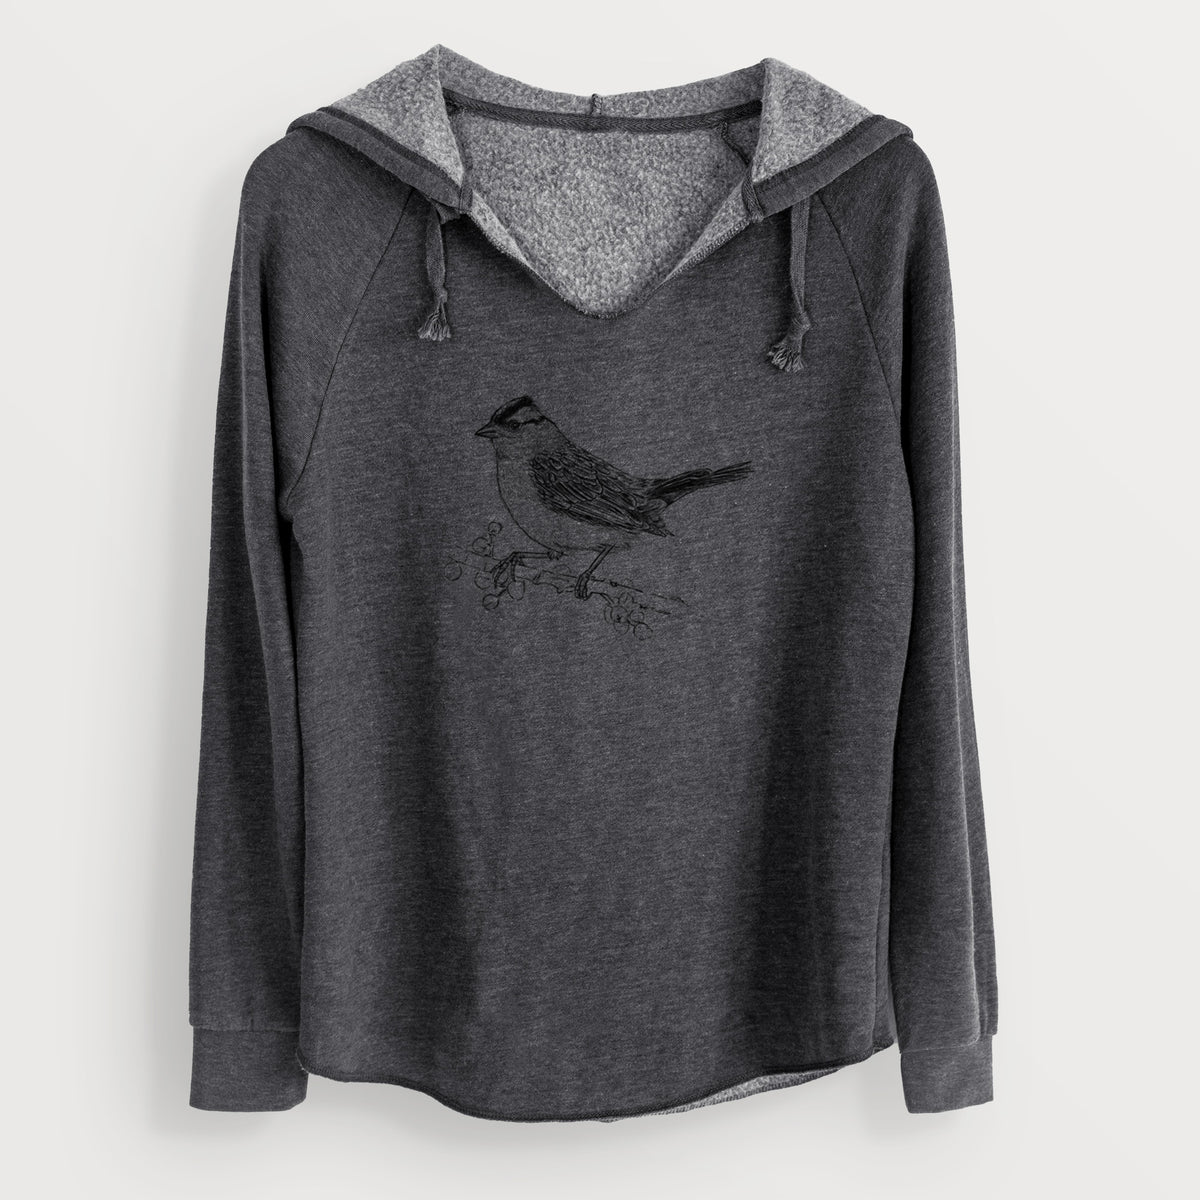 White-crowned Sparrow - Zonotrichia leucophrys - Cali Wave Hooded Sweatshirt